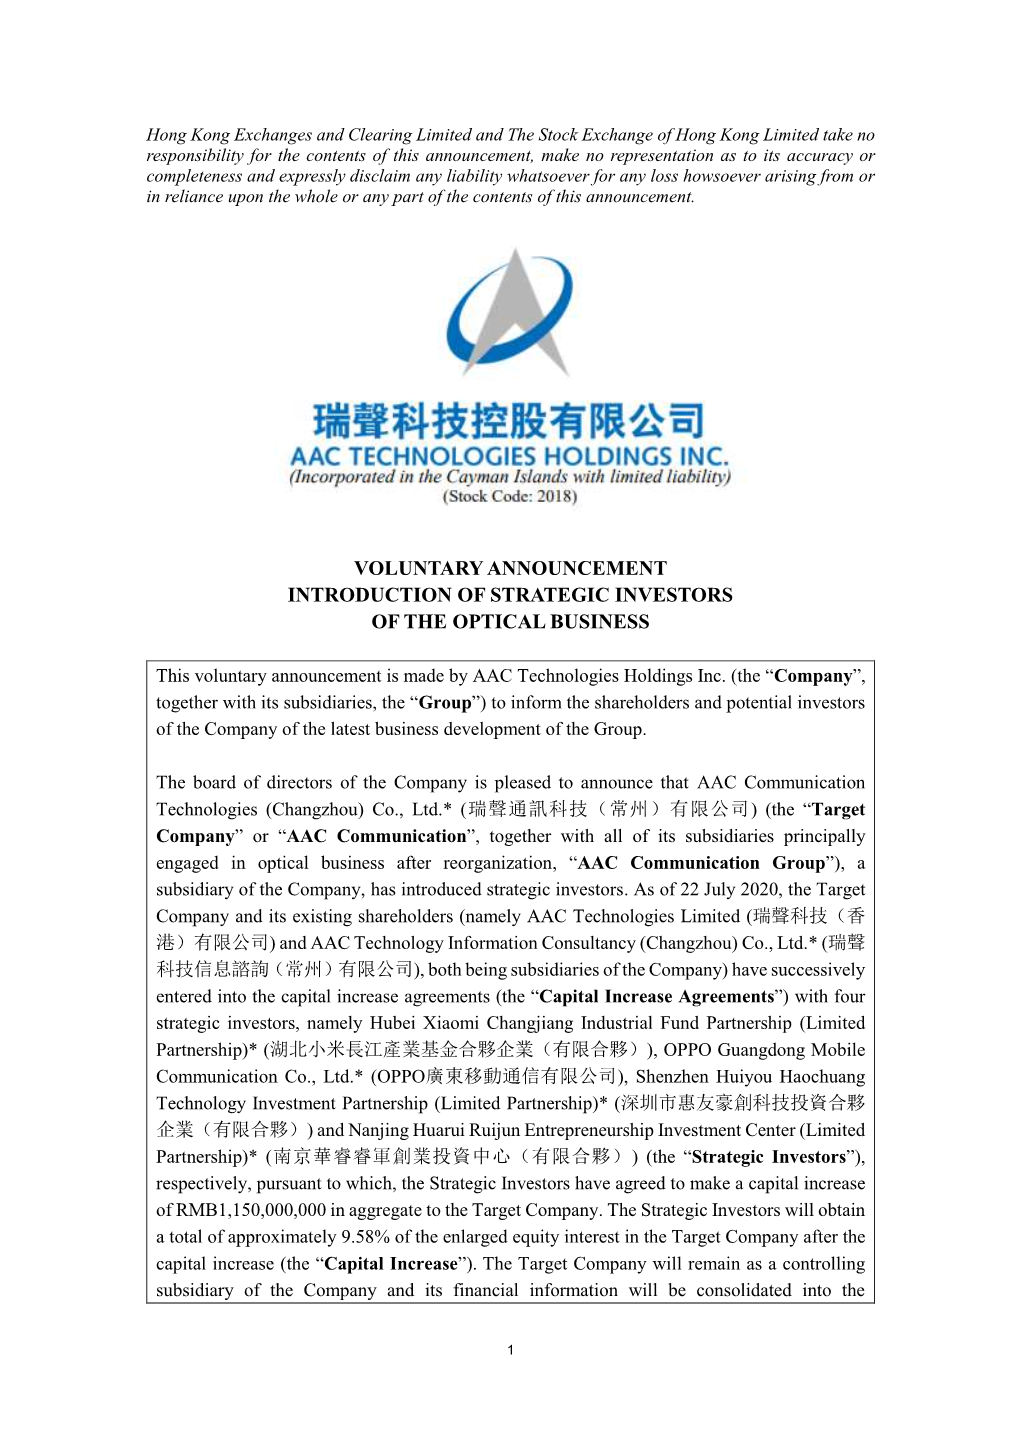 Voluntary Announcement Introduction of Strategic Investors of the Optical Business